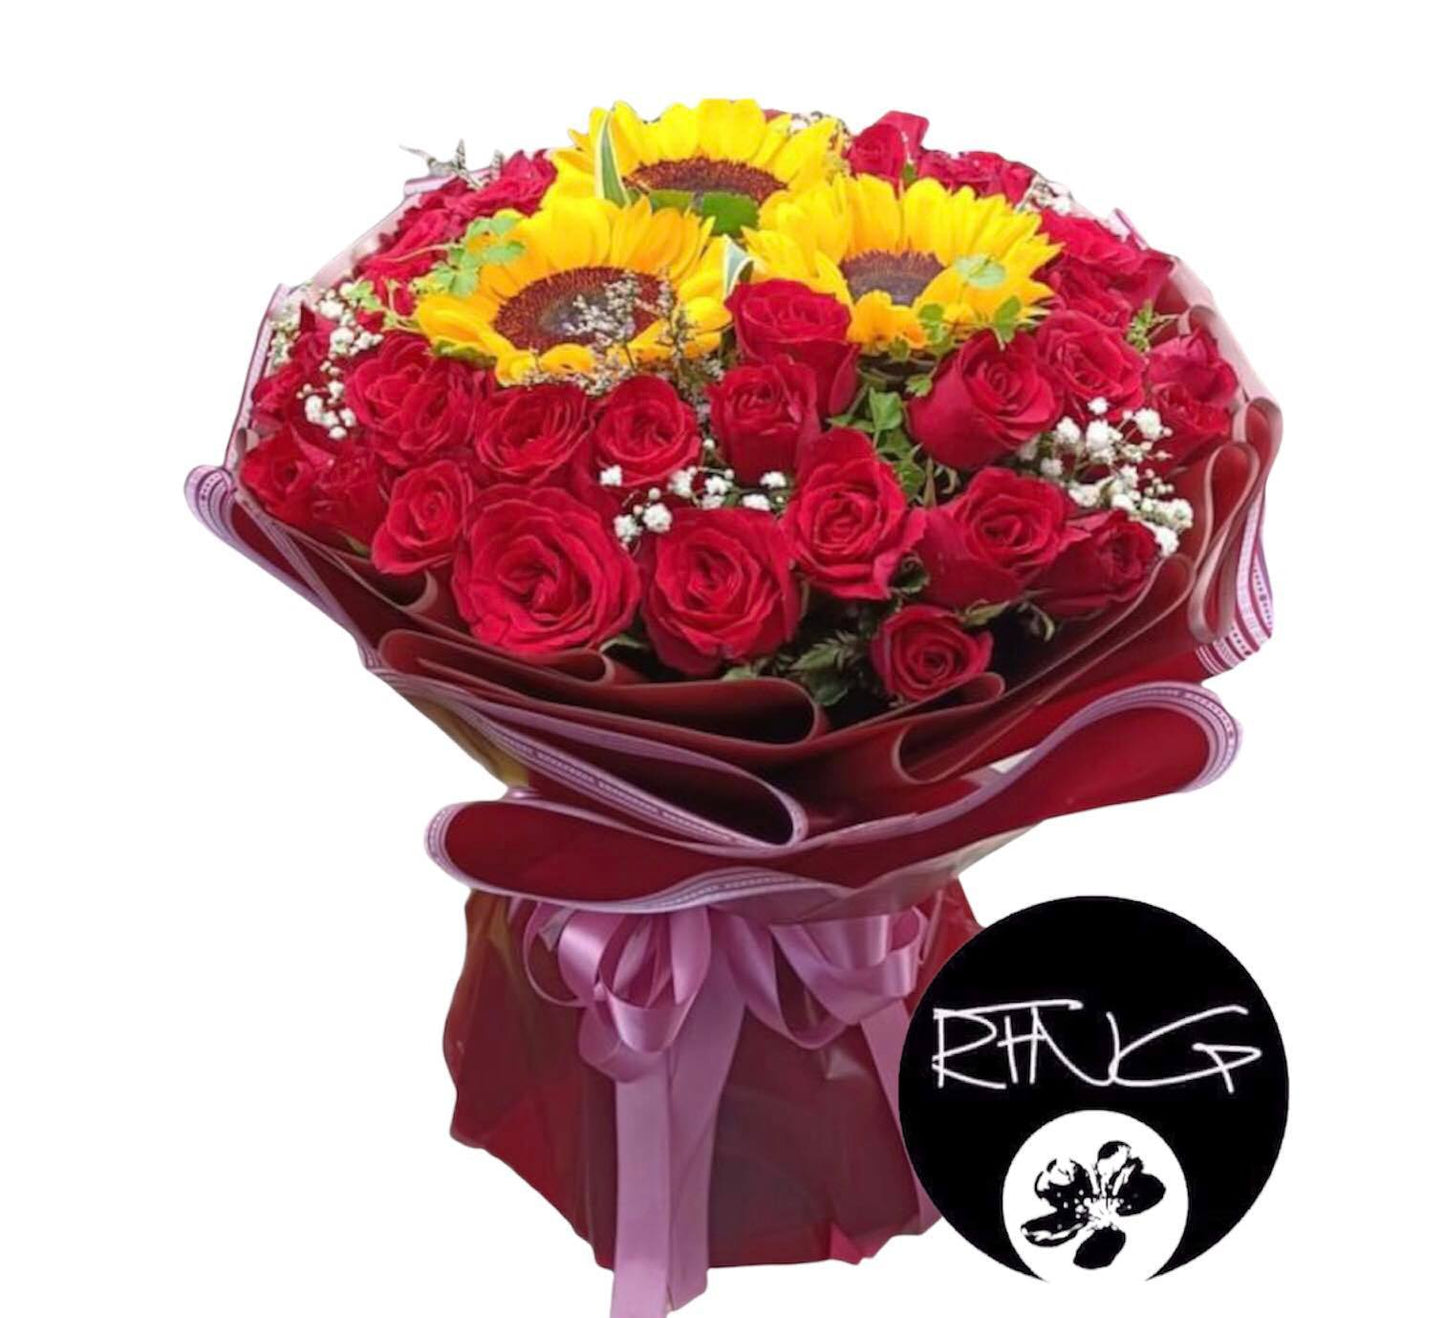 3 dz. Roses and Sunflowers - Redflowersngifts.com